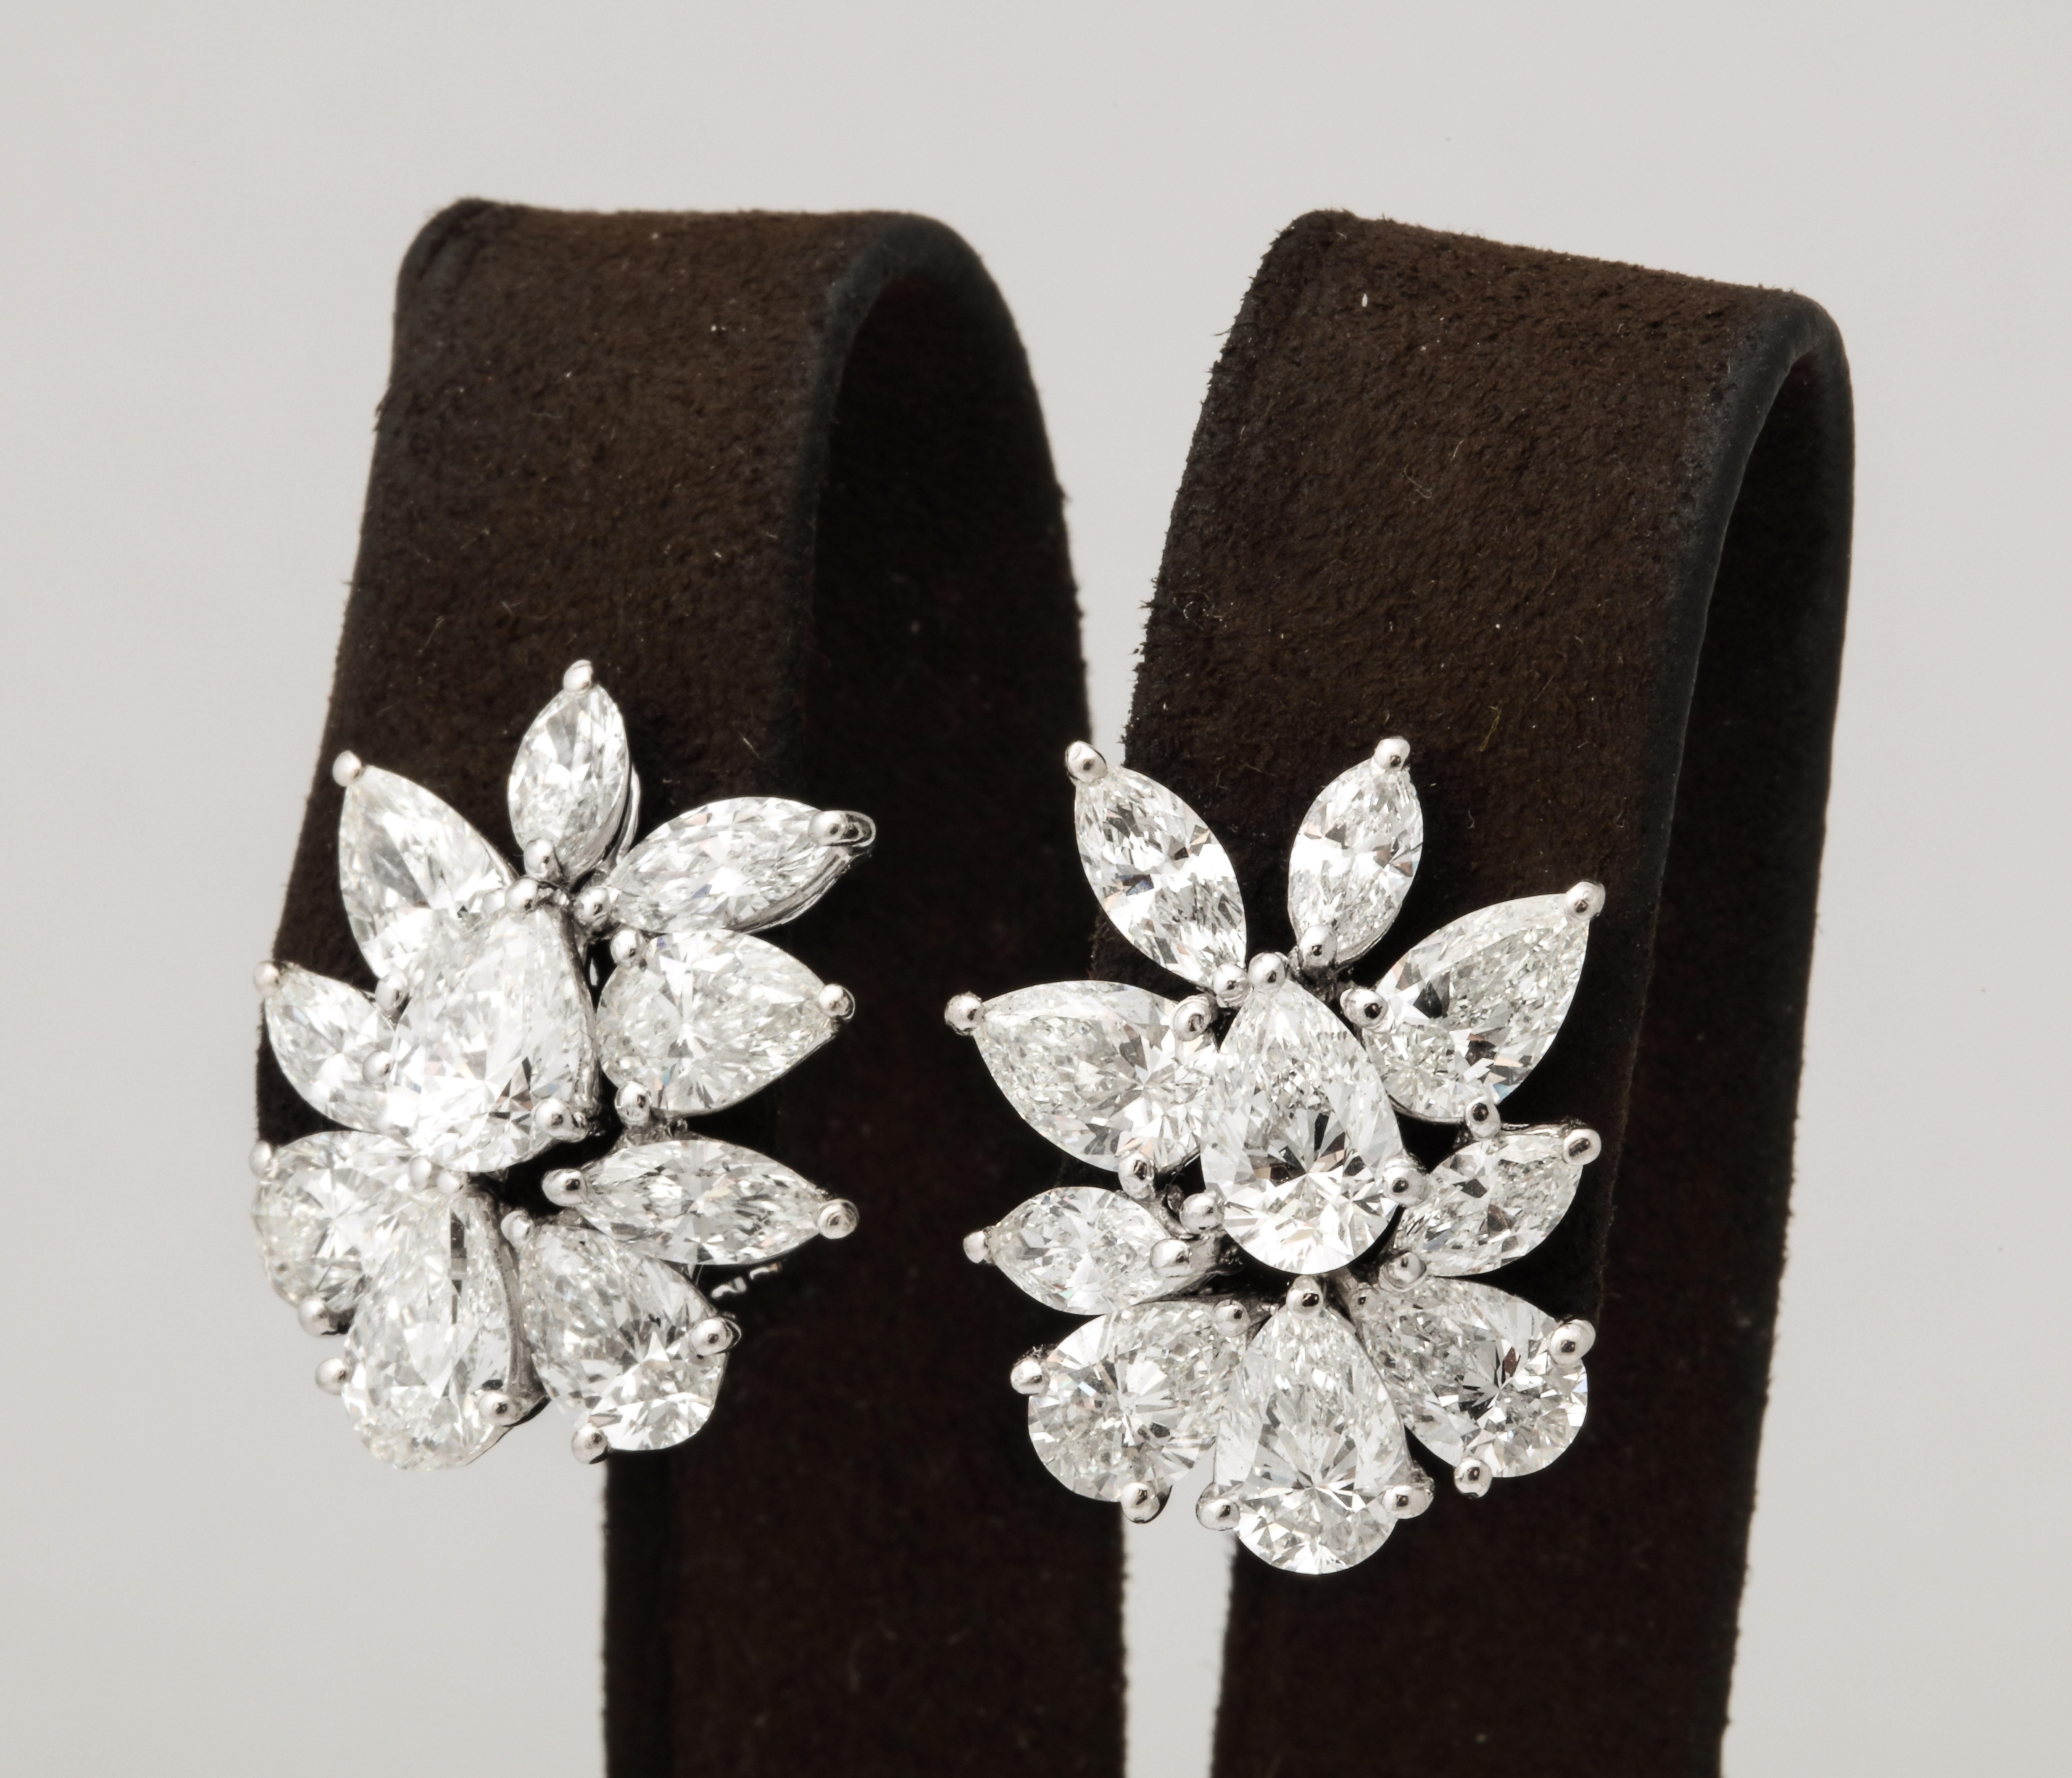 
A fabulous pair of cluster earrings!

11.39 carats of white pear and marquise shaped diamonds set in platinum. 

Just under an inch in length - .75 inches wide. 

An important look and design.